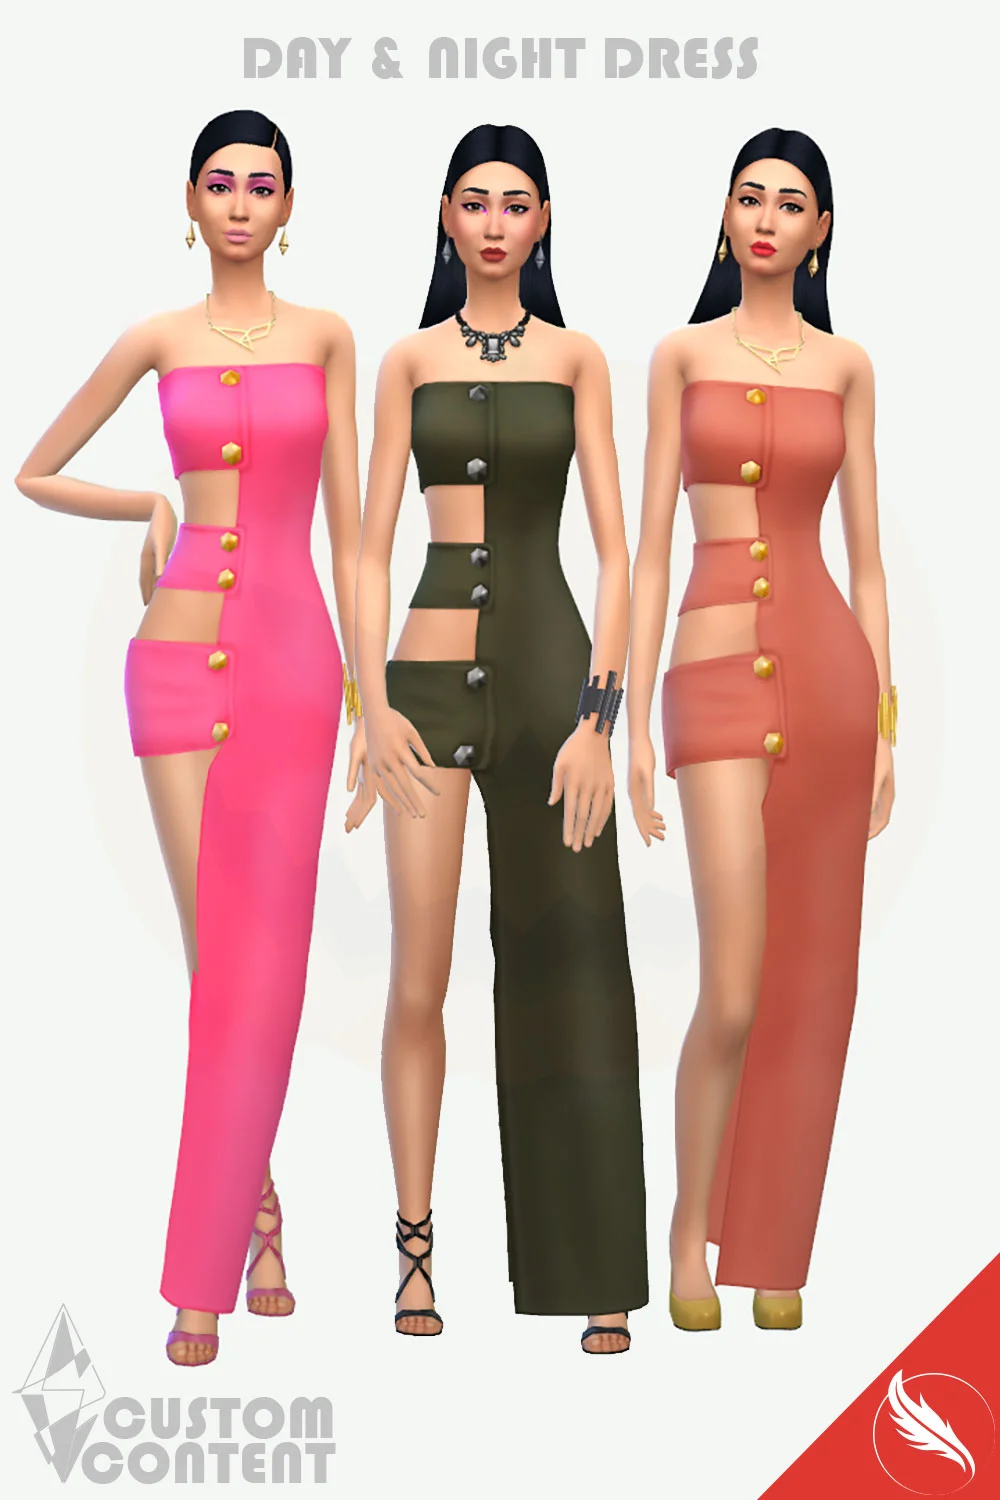 The Sims 4 Dress